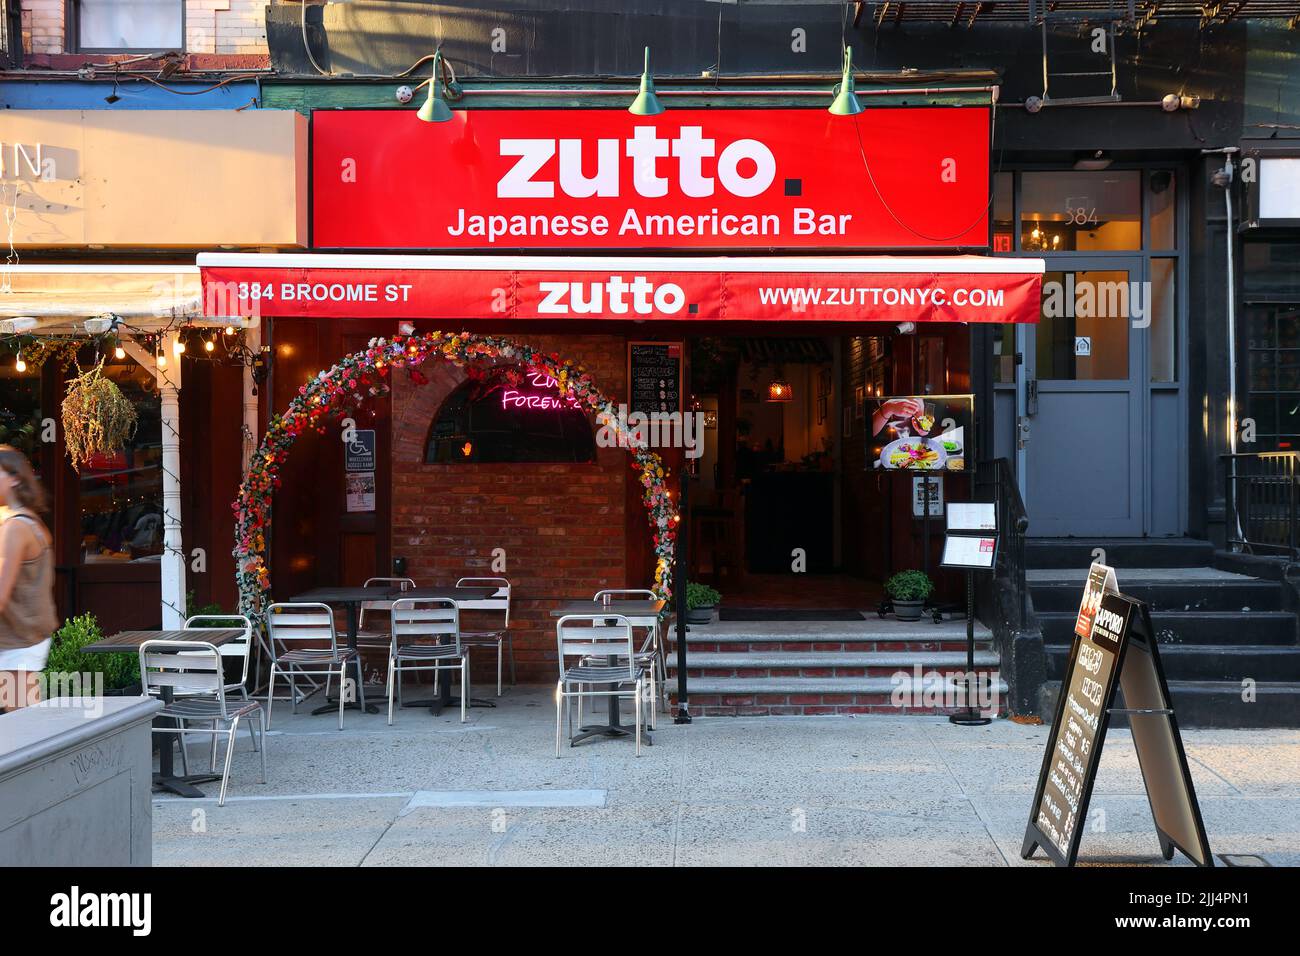 Zutto, 384 Broome St, New York, NYC storefront photo of a Japanese American gastropub in Manhattan Chinatown/Little Italy. Stock Photo